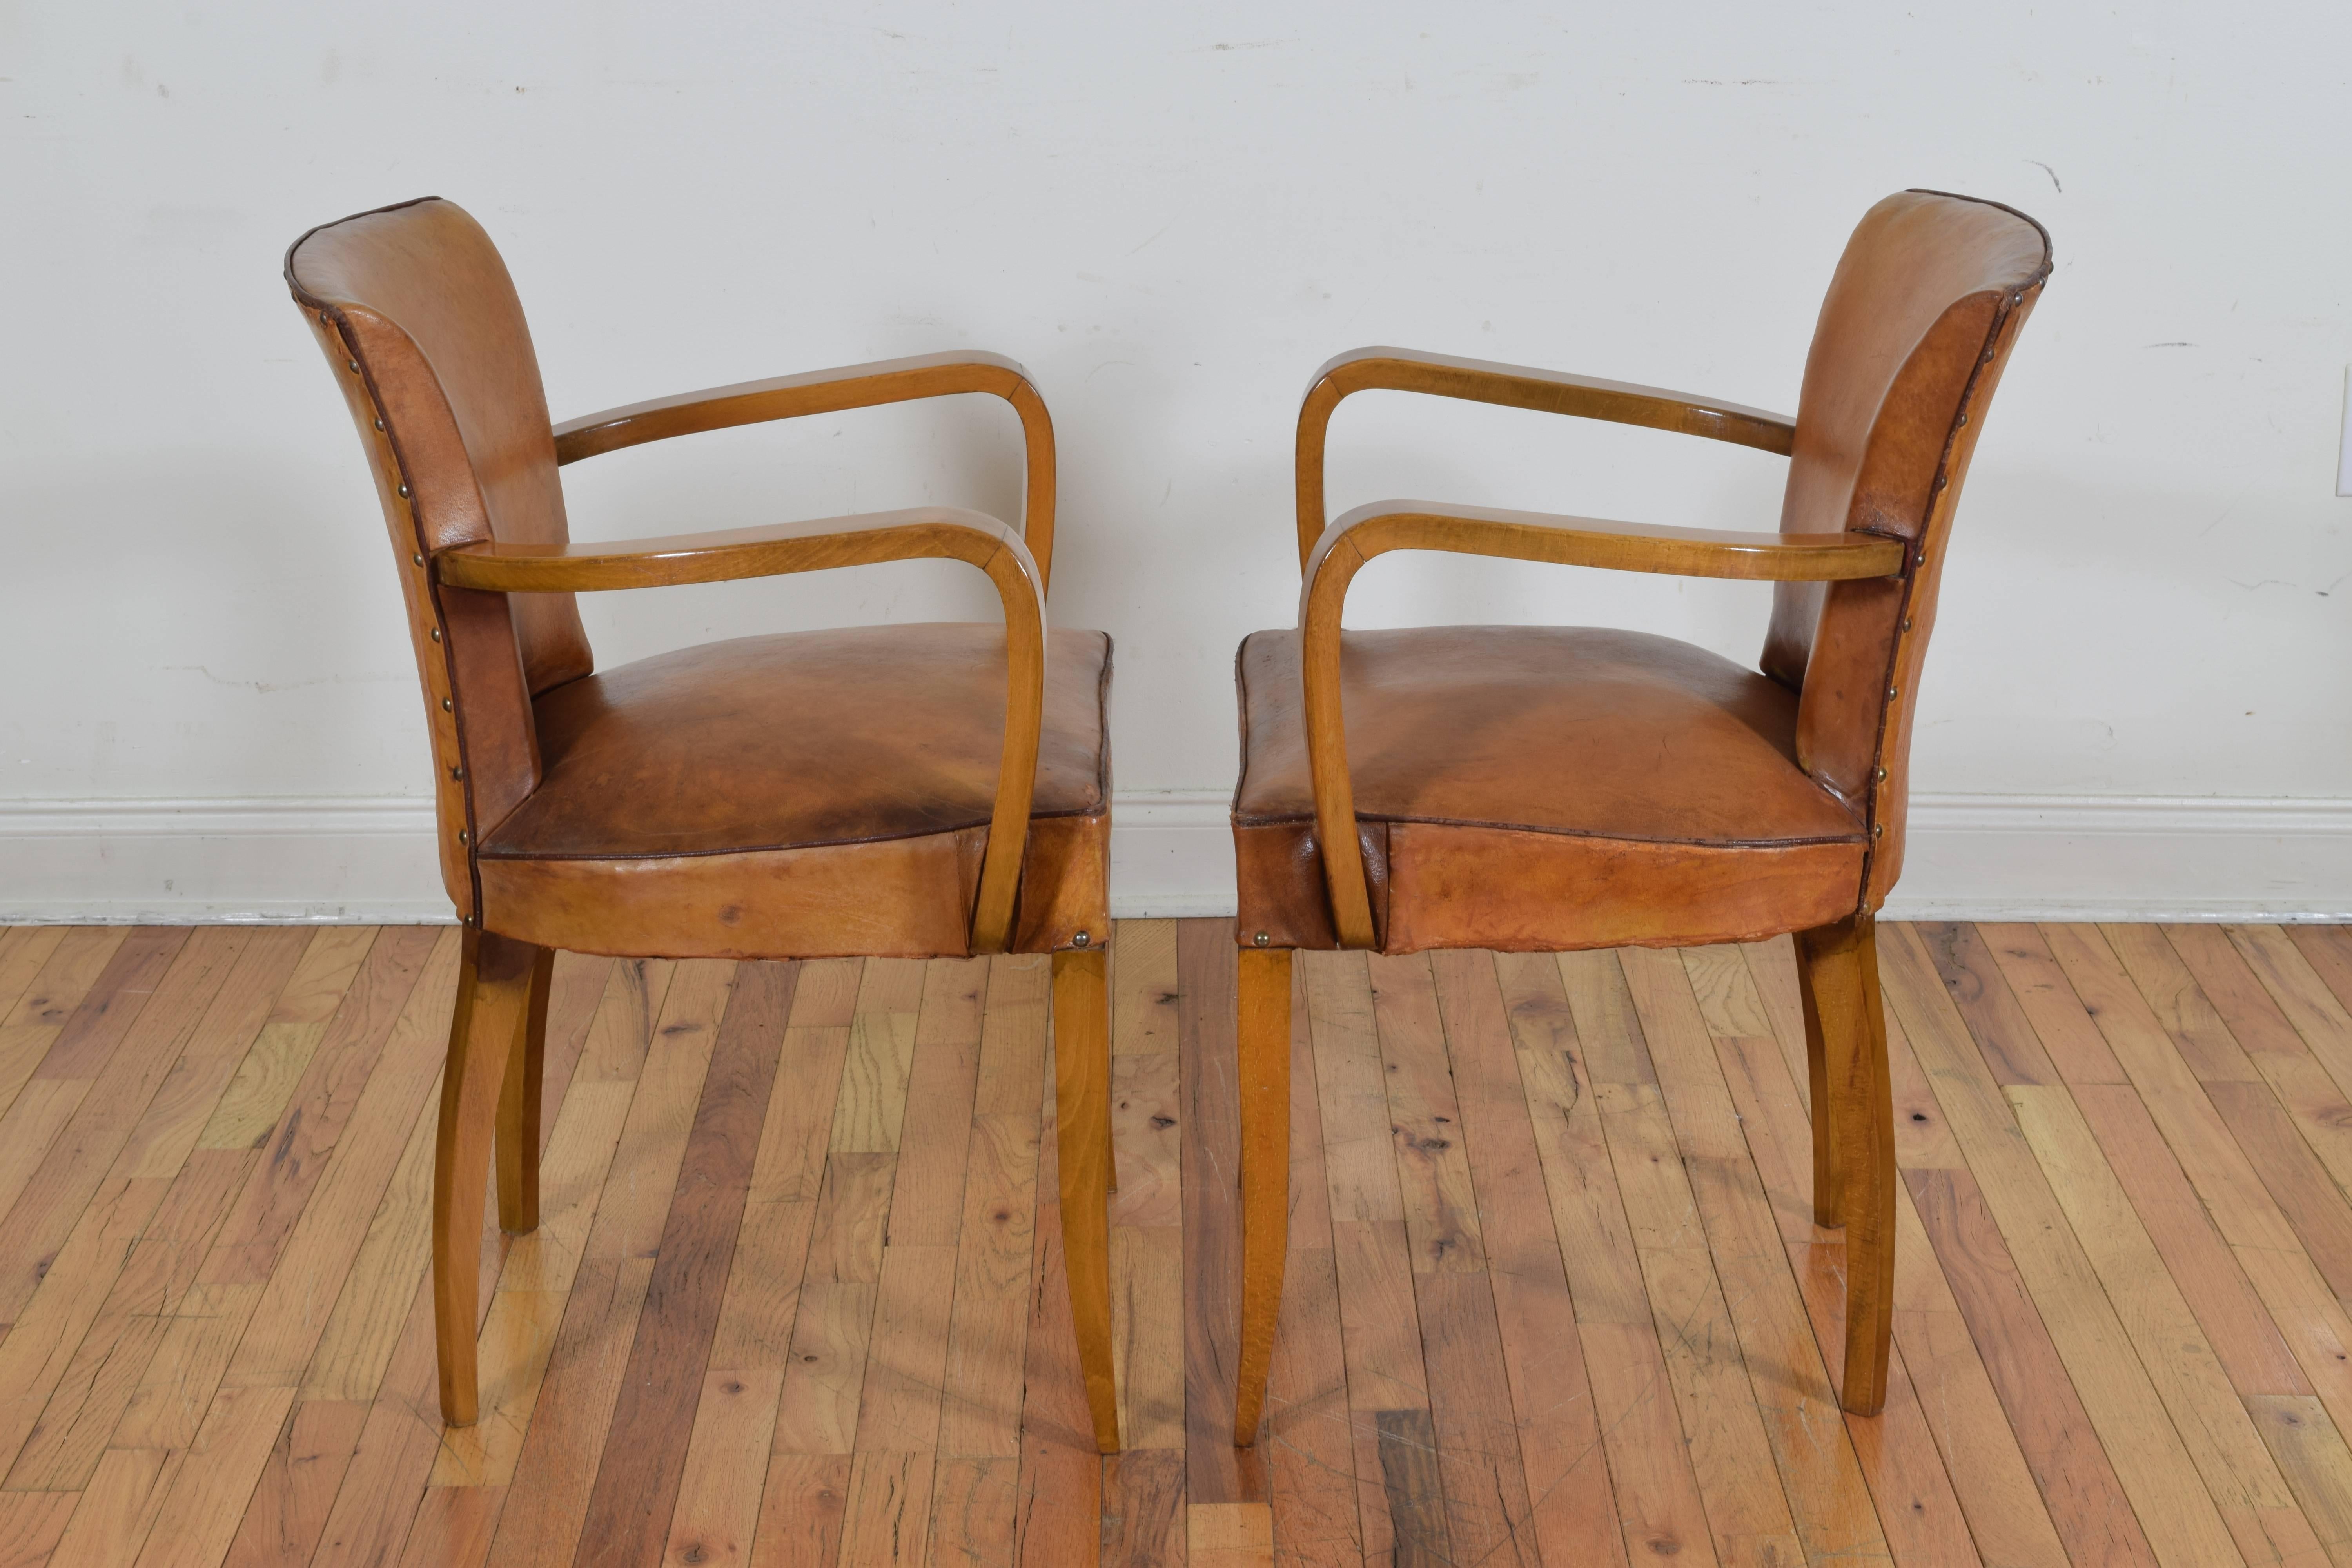 Mid-20th Century Pair of French Art Deco Light Walnut and Leather Upholstered Armchairs